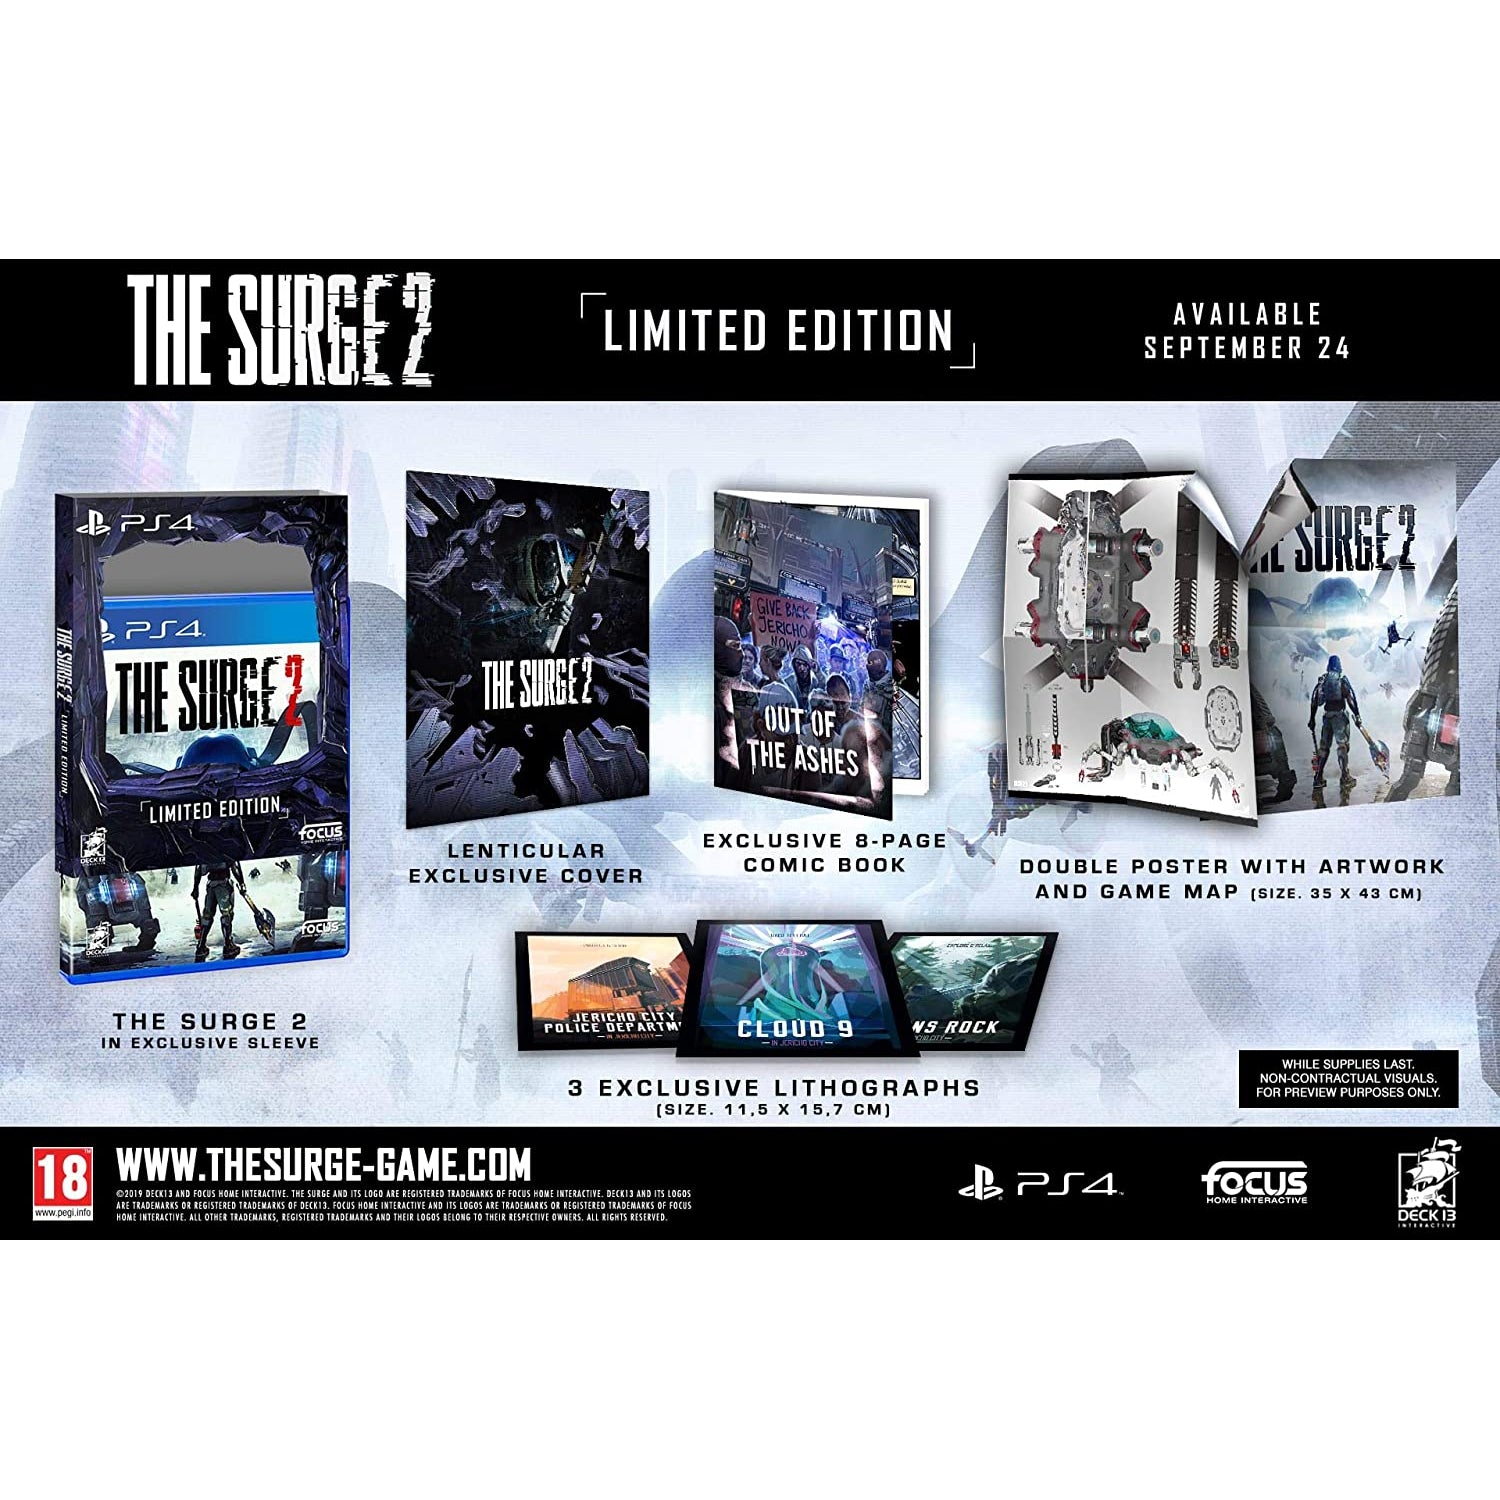 The Surge 2 Limited Edition - PlayStation 4